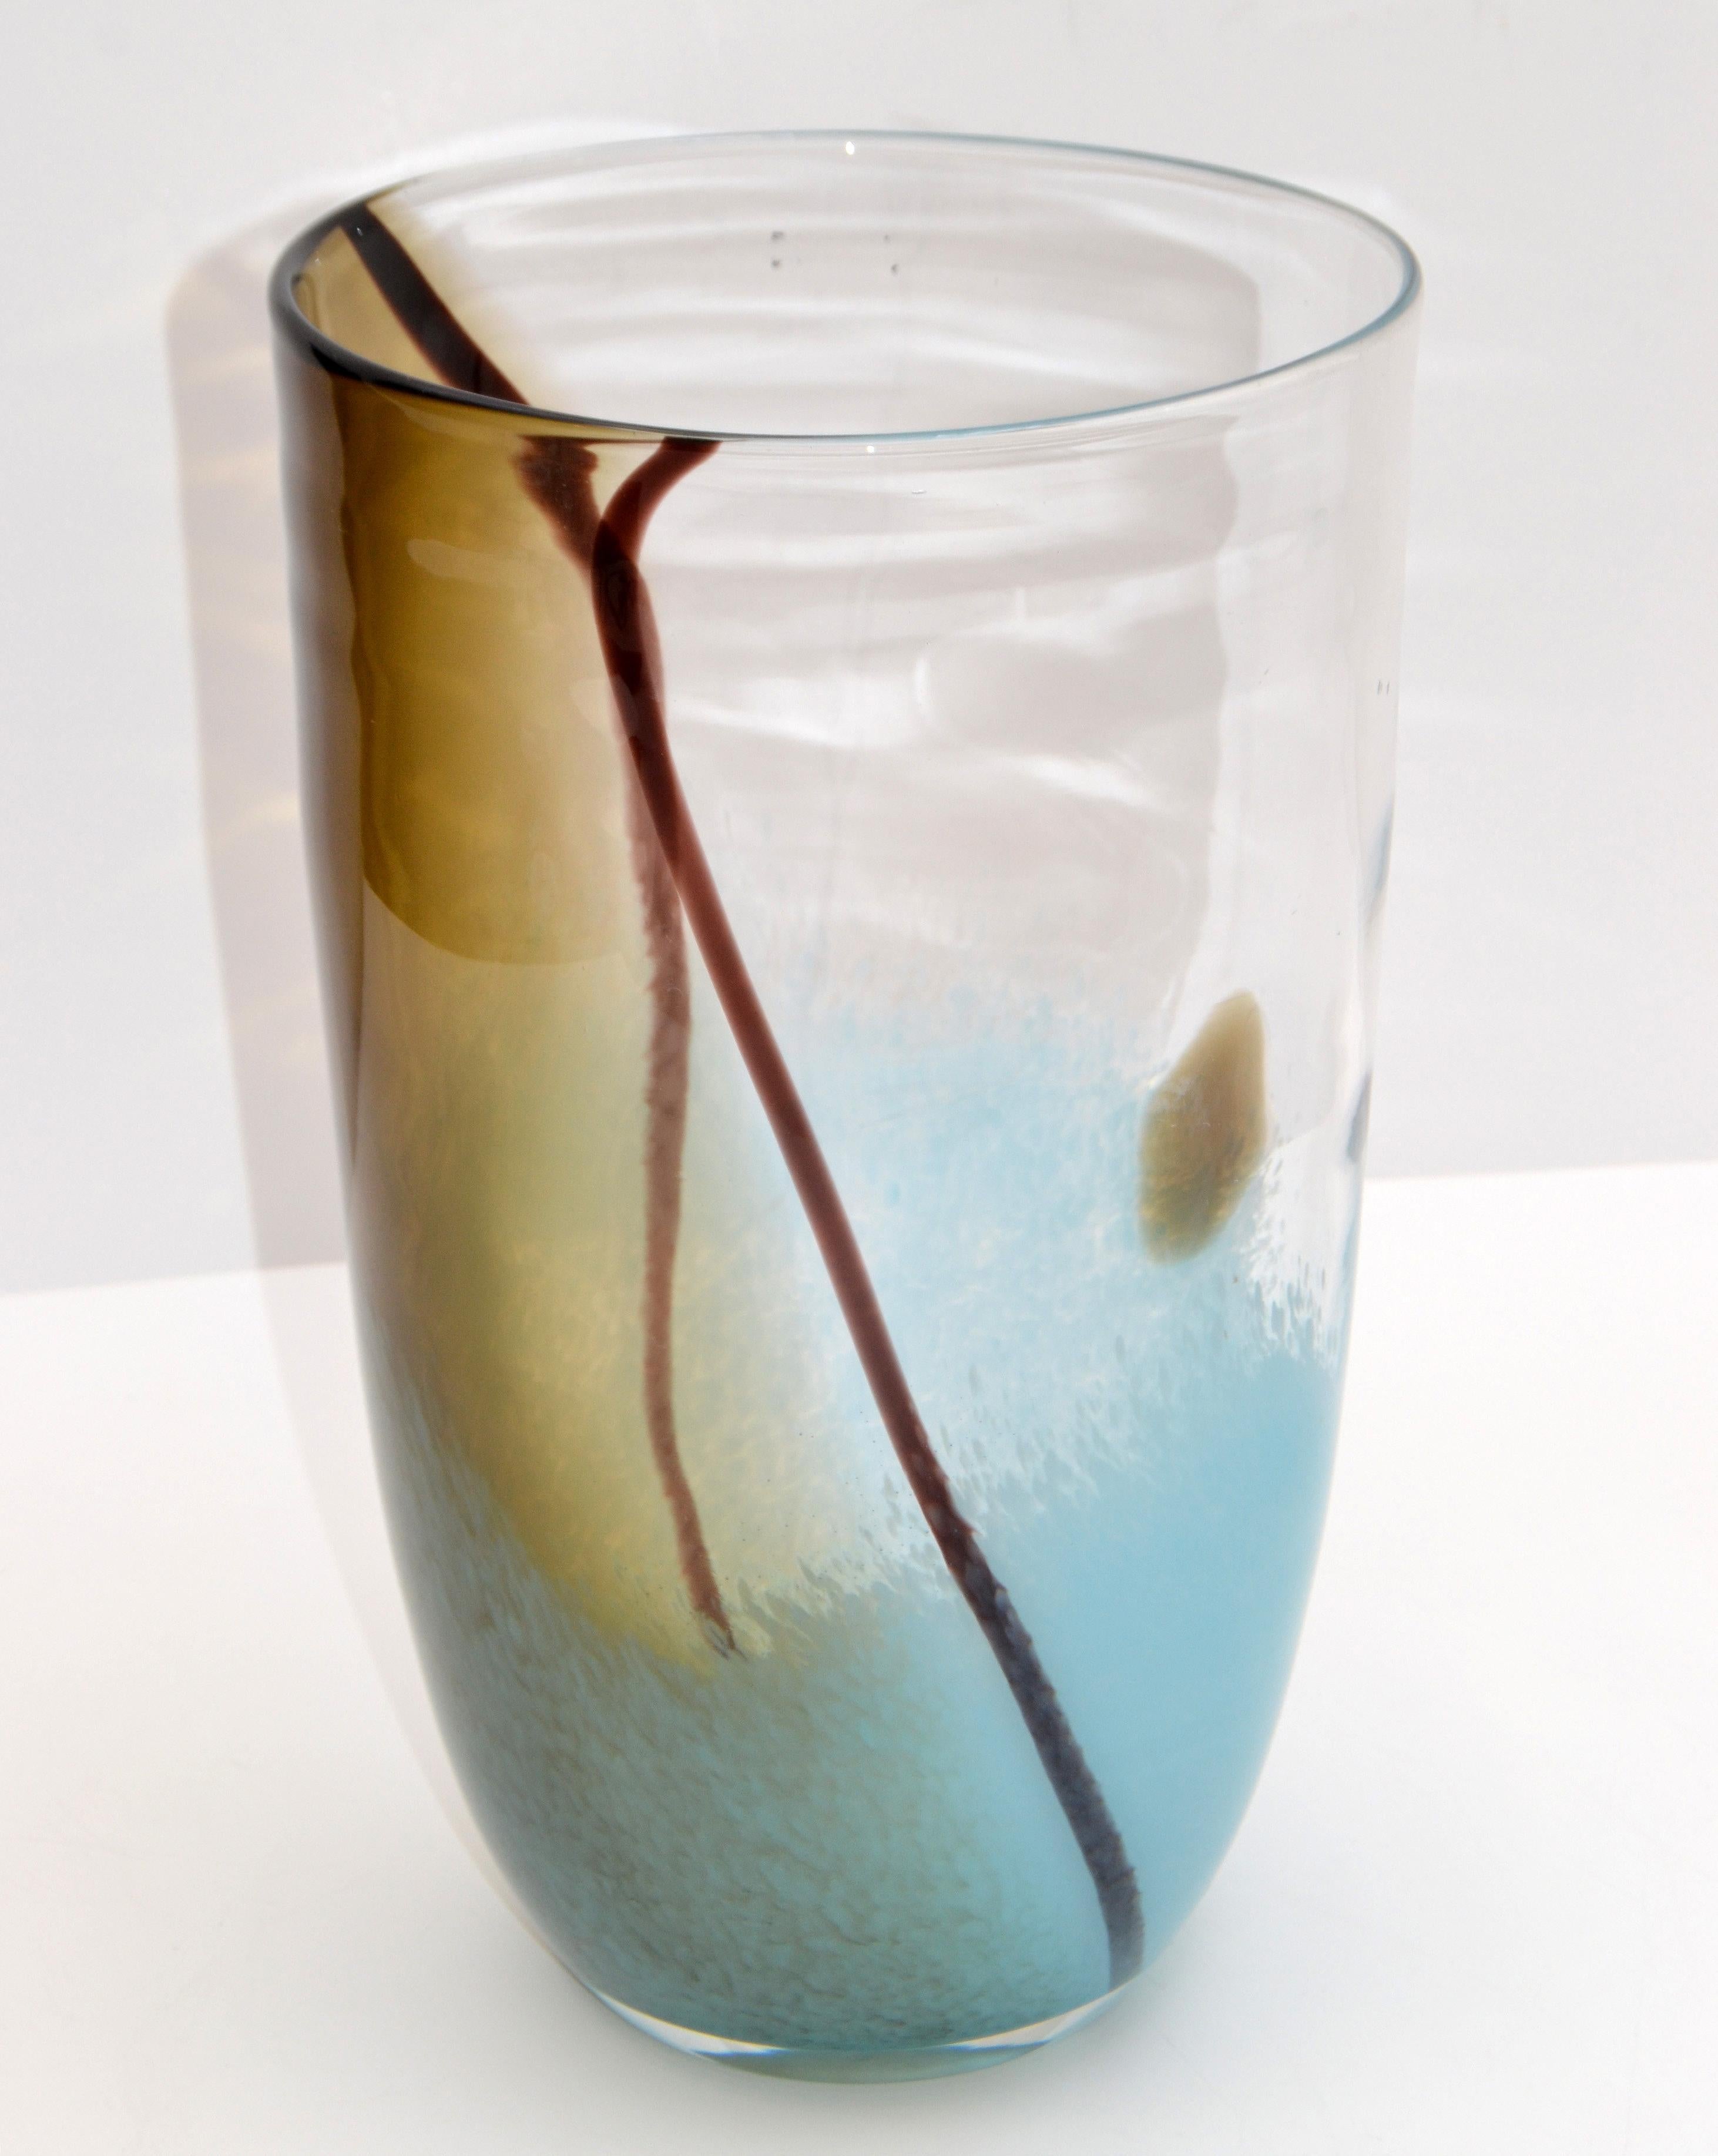 Elegant Mid-Century Modern hand blown Murano art glass vase in turquoise, brown and clear colors.
Made in Italy in the late 1970s.
Simply lovely.